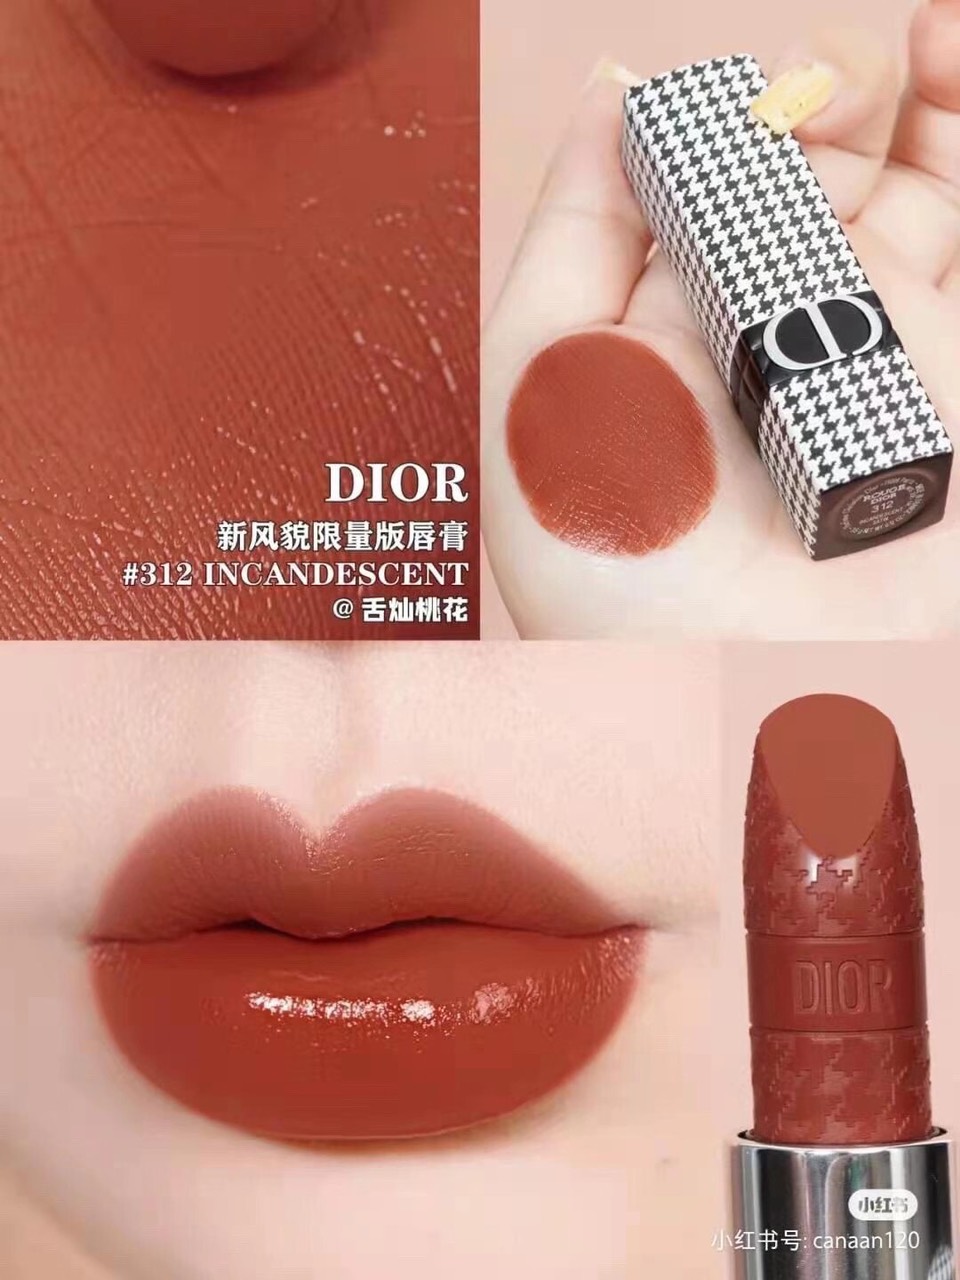 Son Dior 312 Limited Incandescent  Đỏ Gạch New Look Mới Toanh HOT